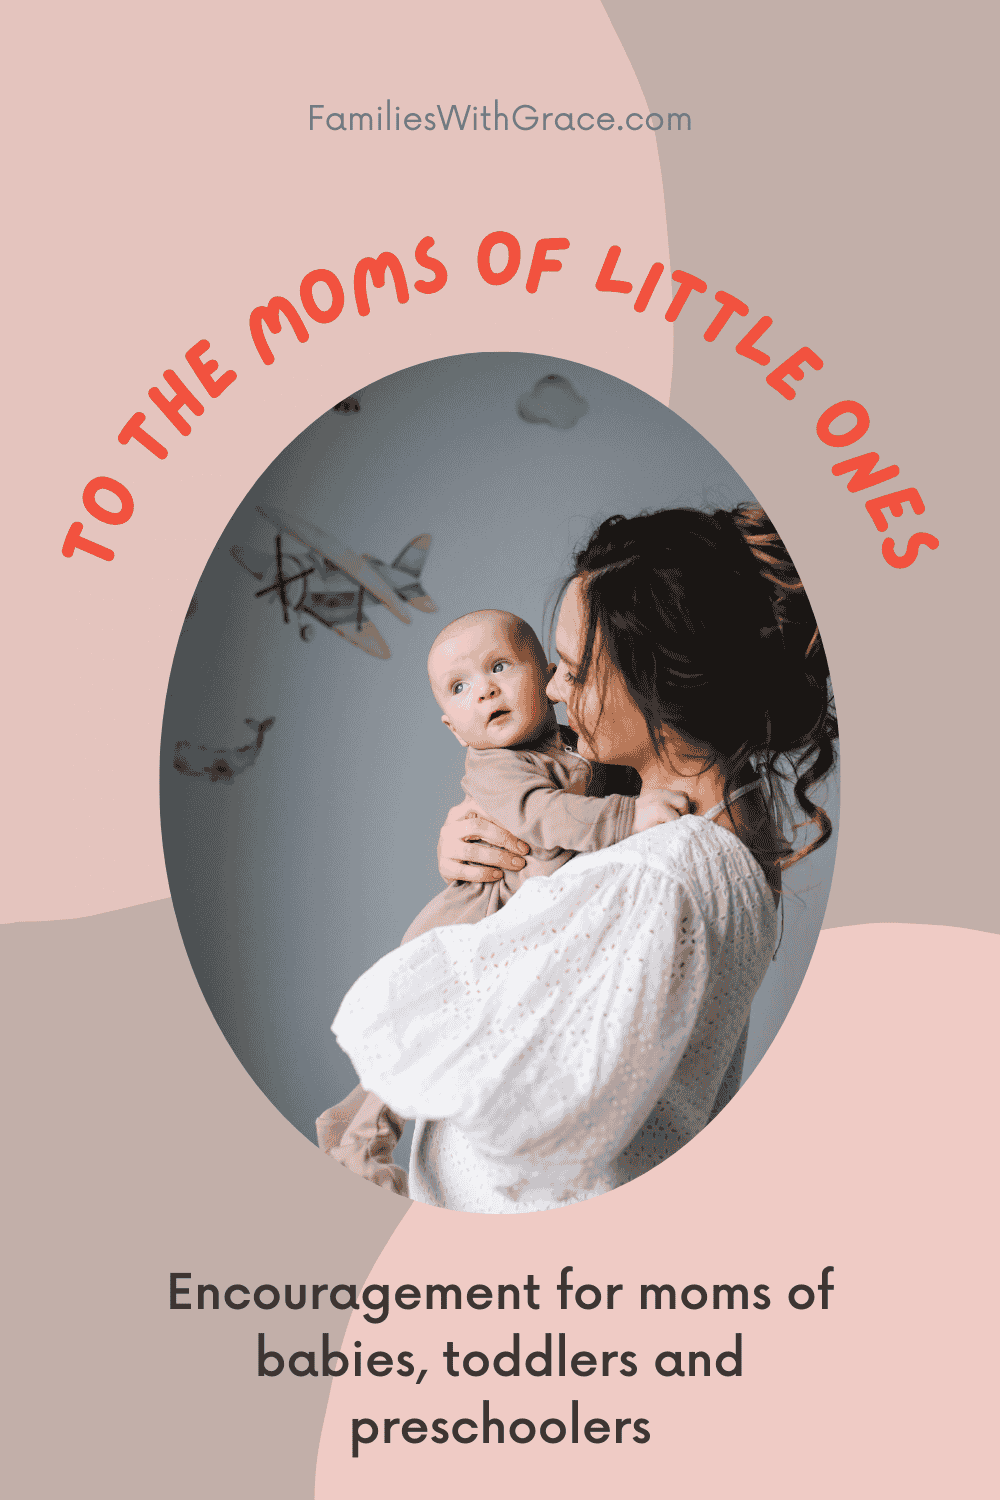 To the moms of little ones